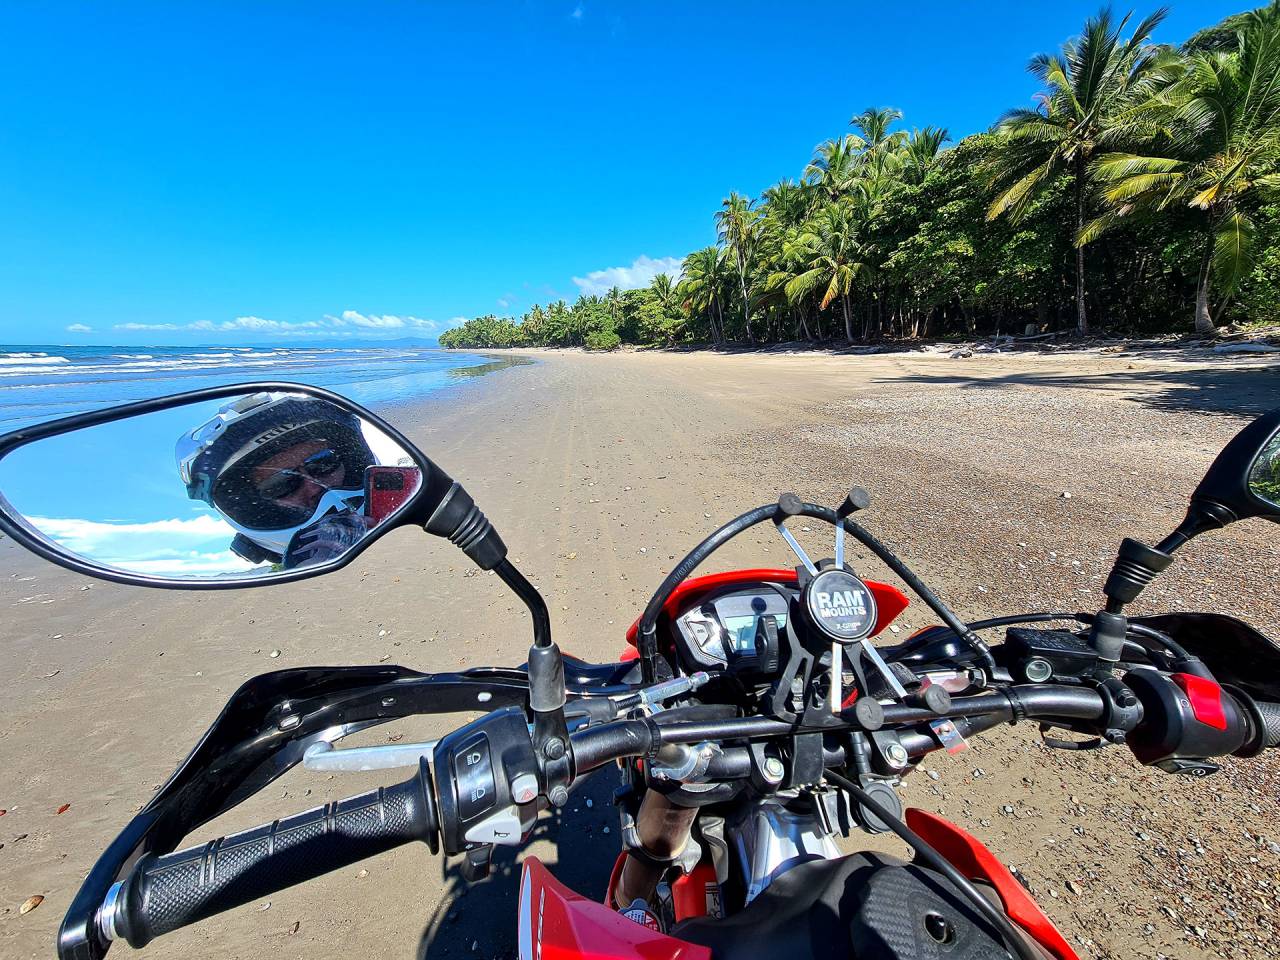 Where to go on a motorcycle tour? Here are 4 places that will surprise you